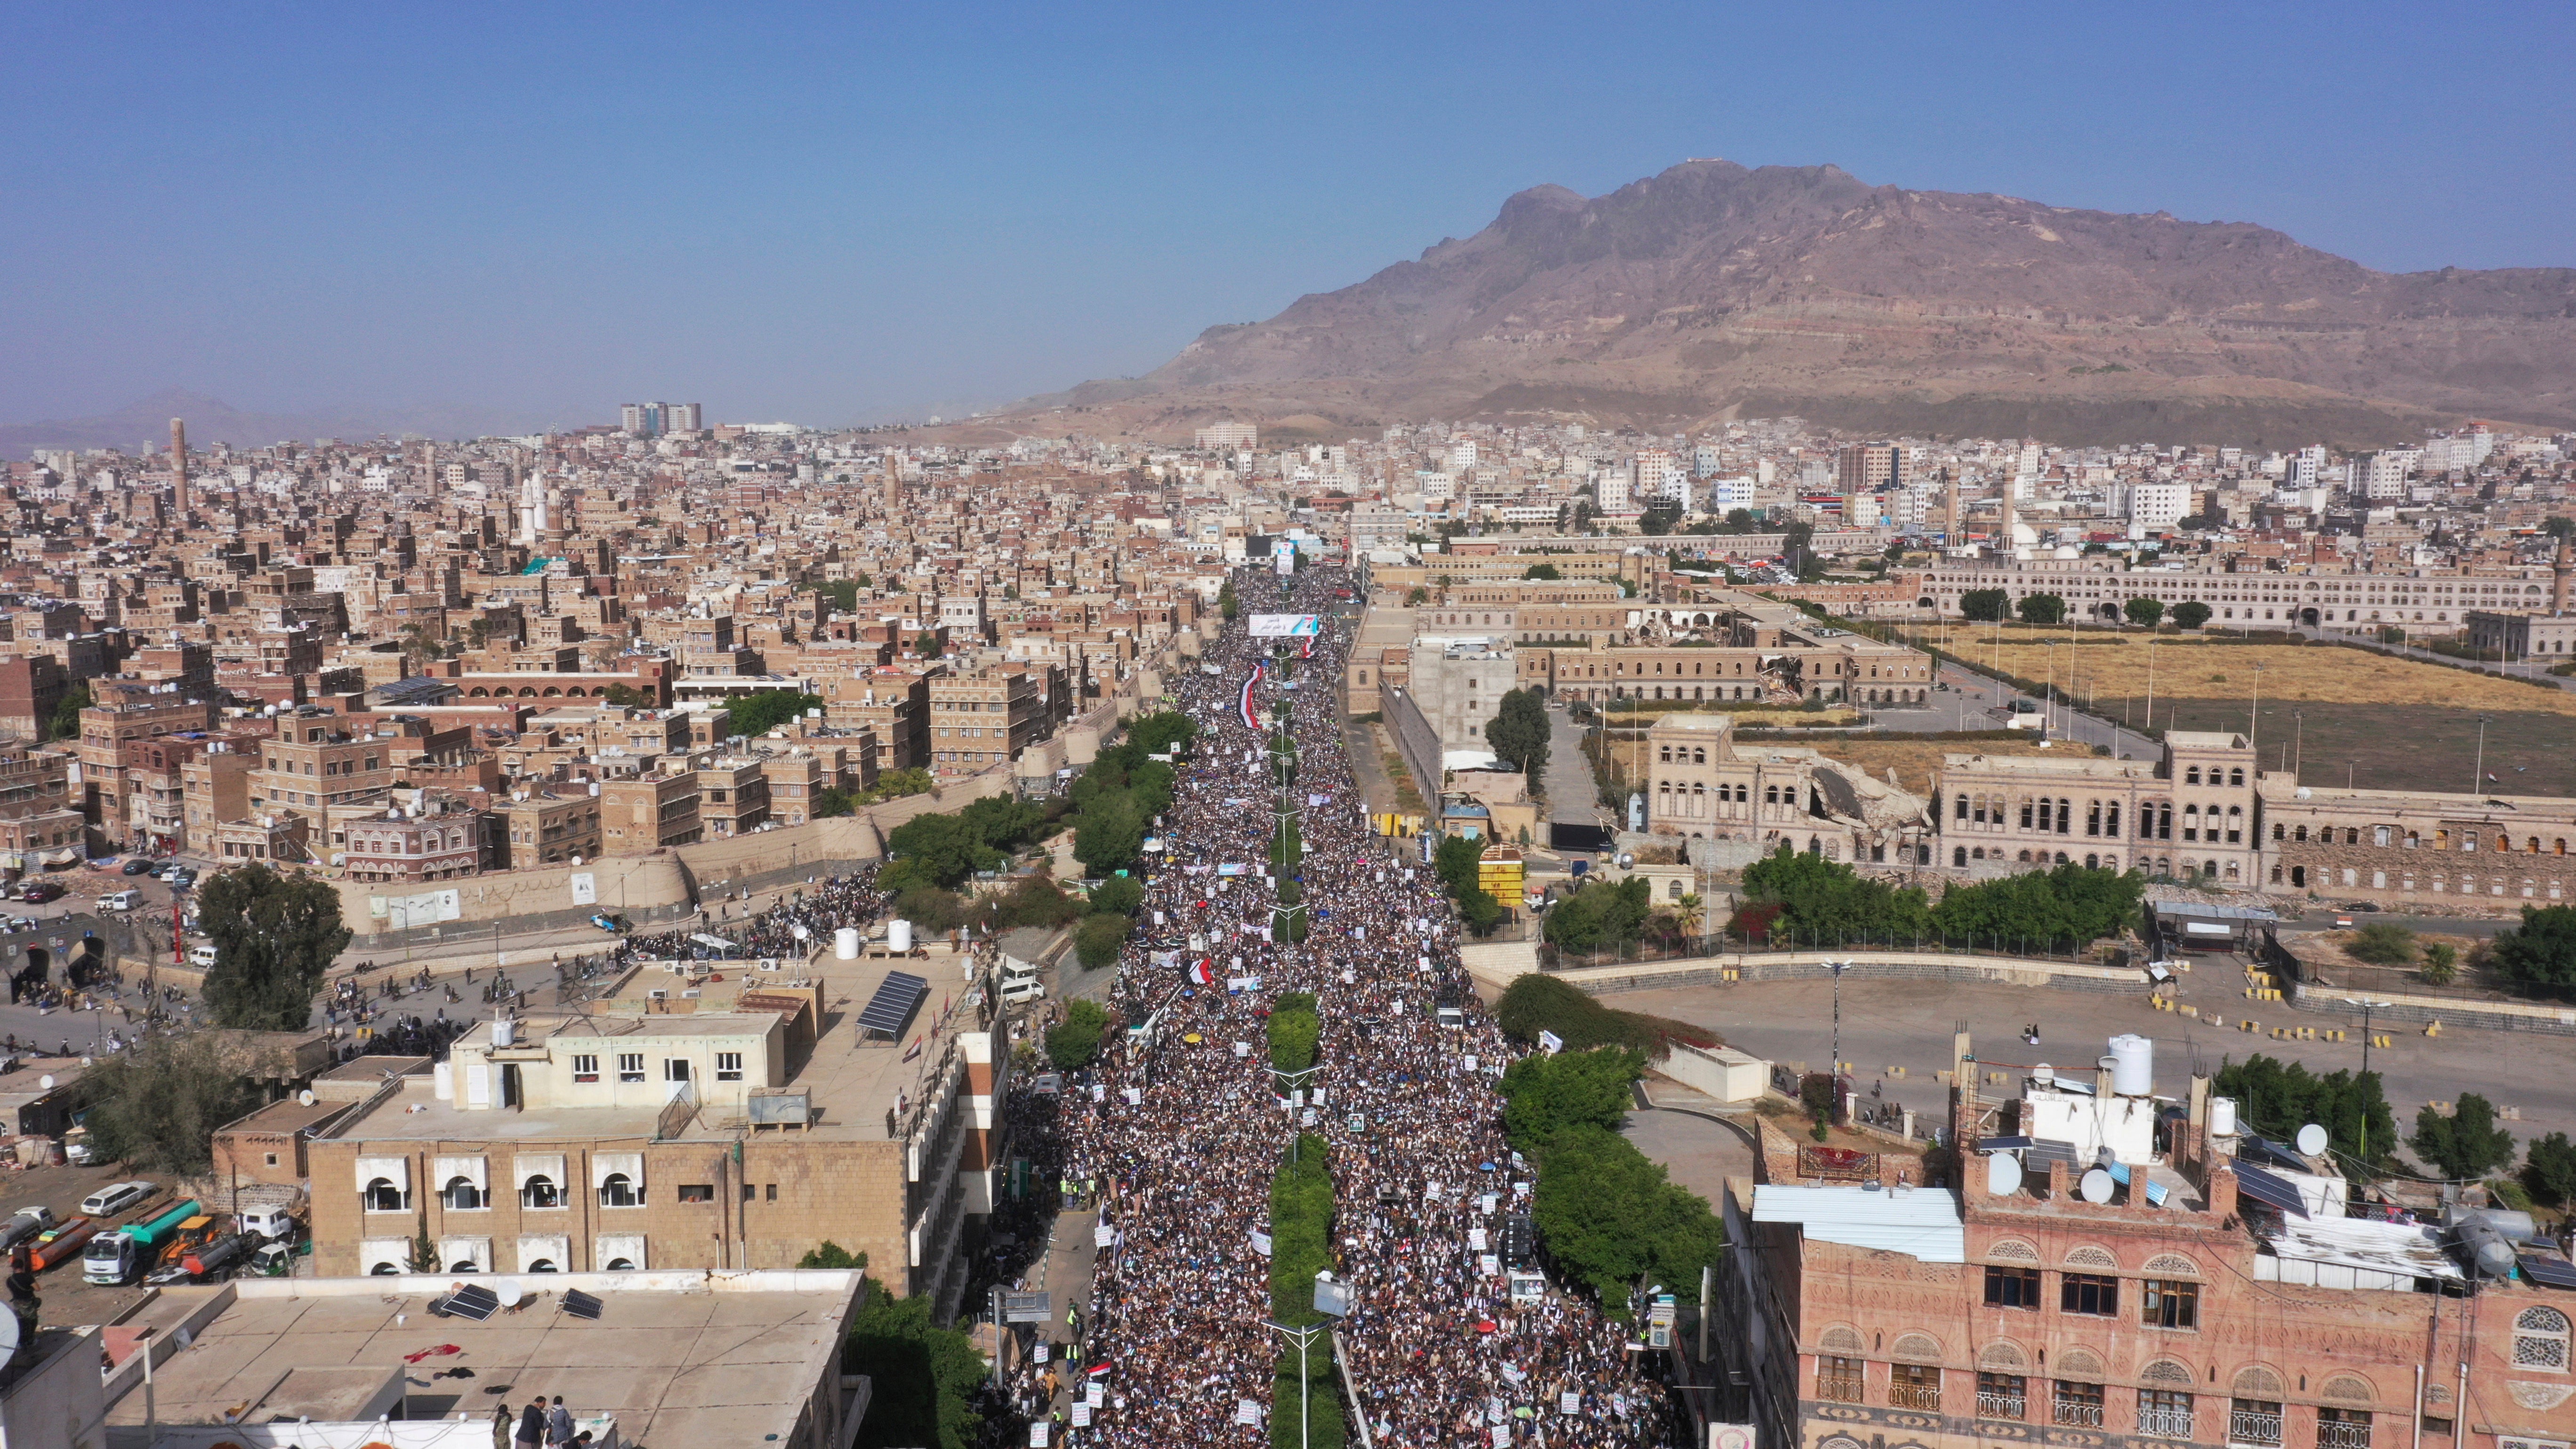 Houthi supporters attend a rally marking the seventh anniversary of the Saudi-led coalition's intervention in Yemen's war in Sanaa, Yemen, Saturday